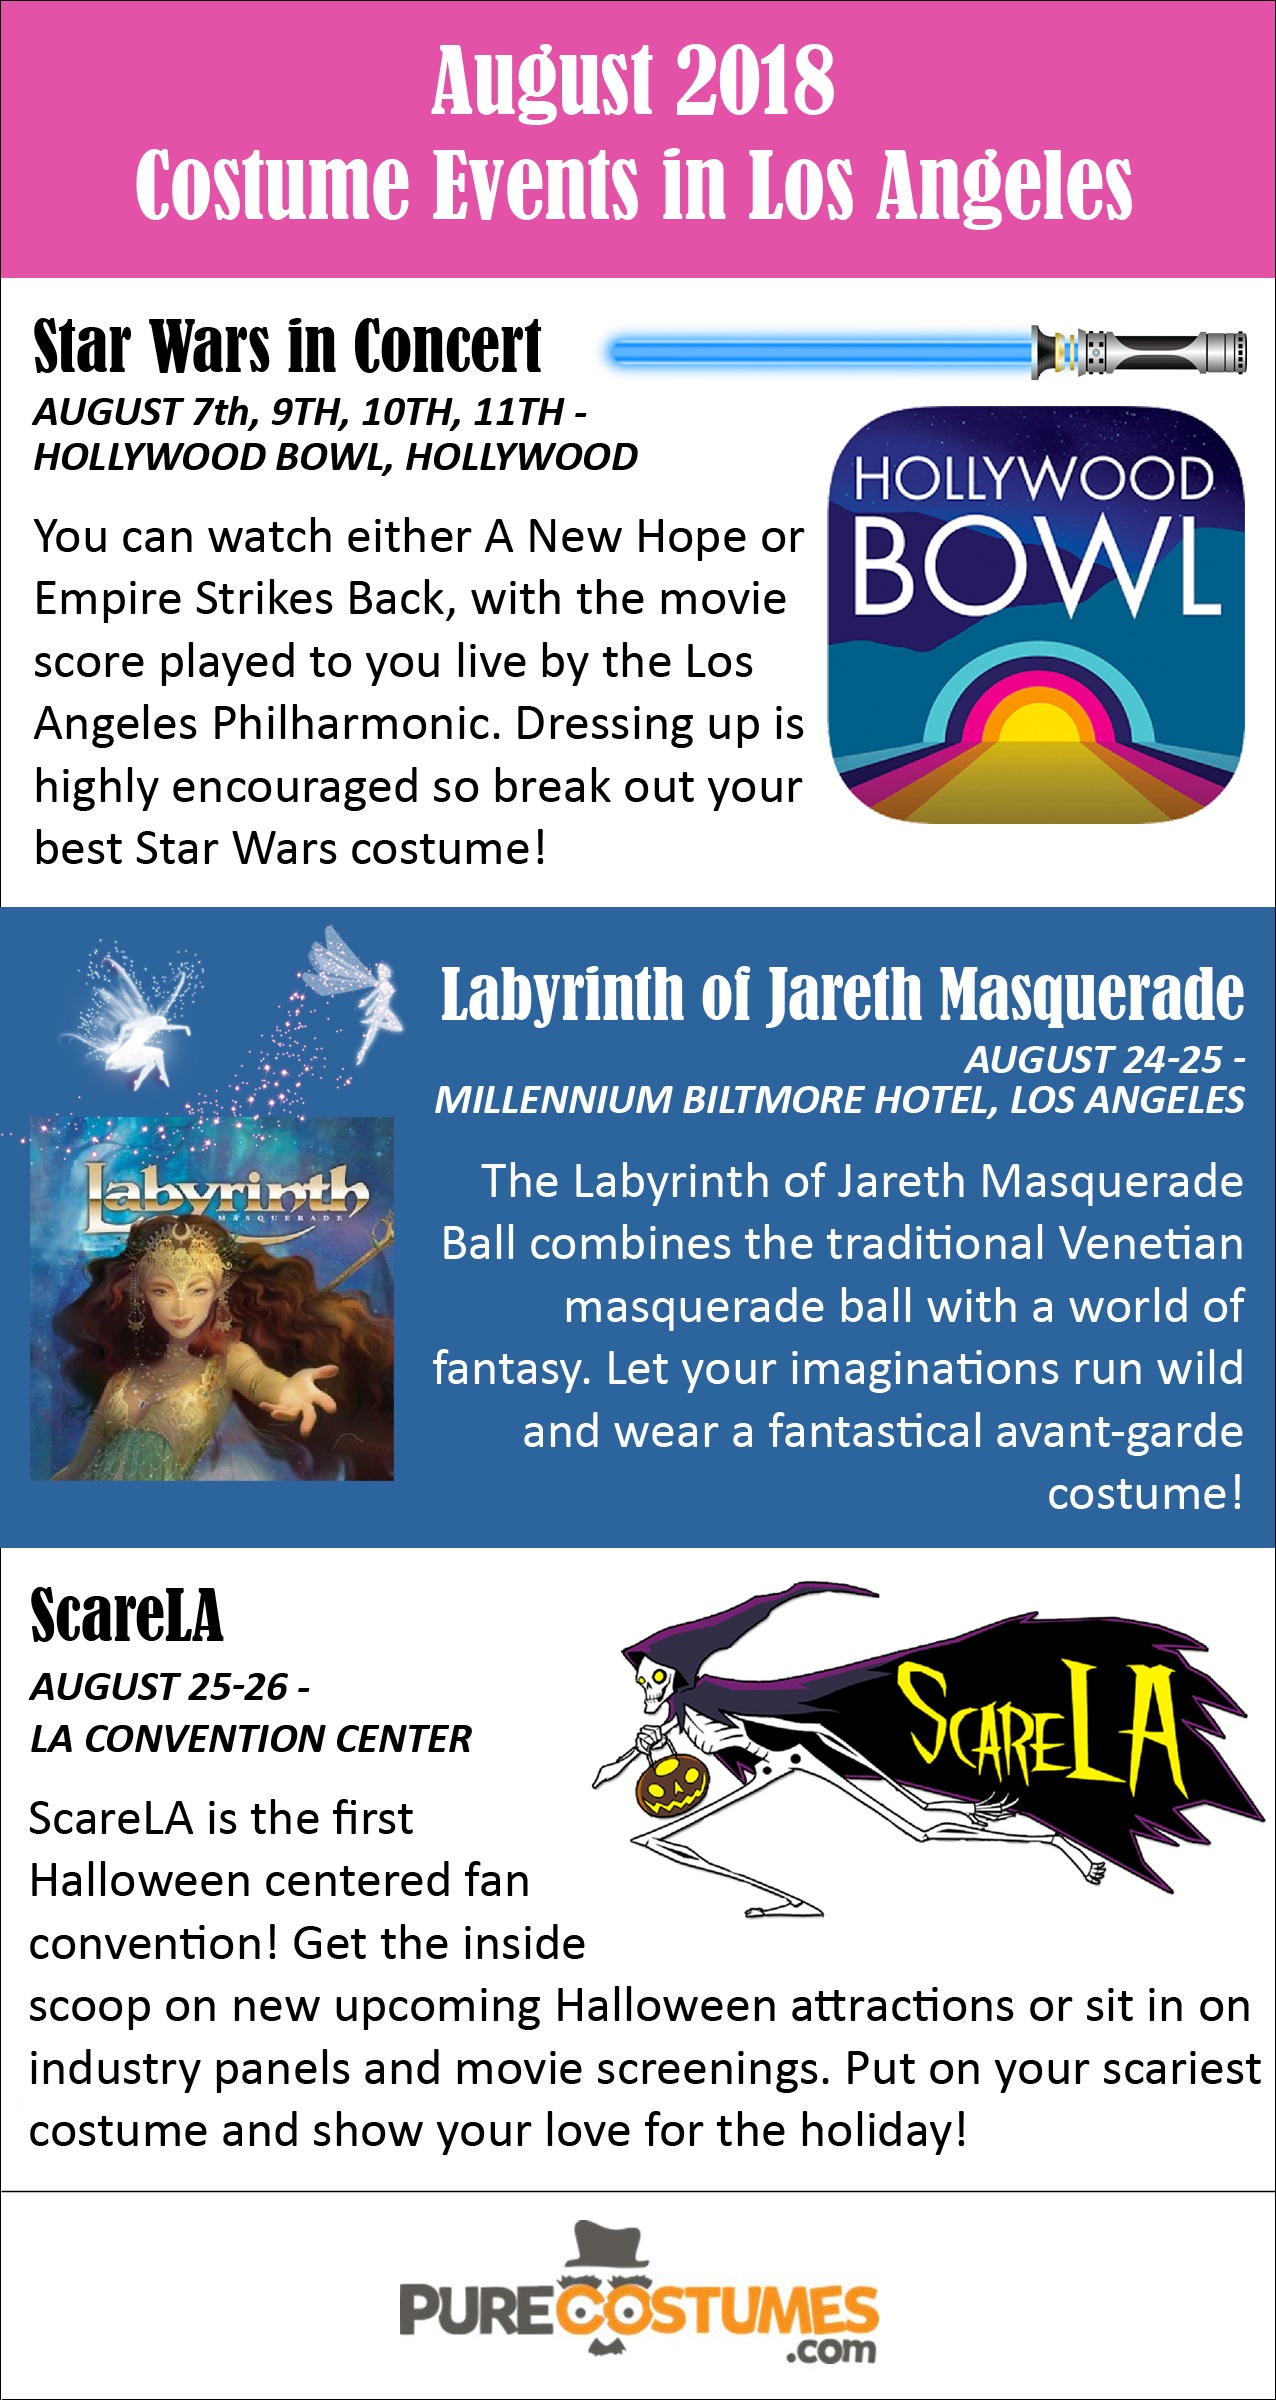 los angeles costume events august 2018 infographic